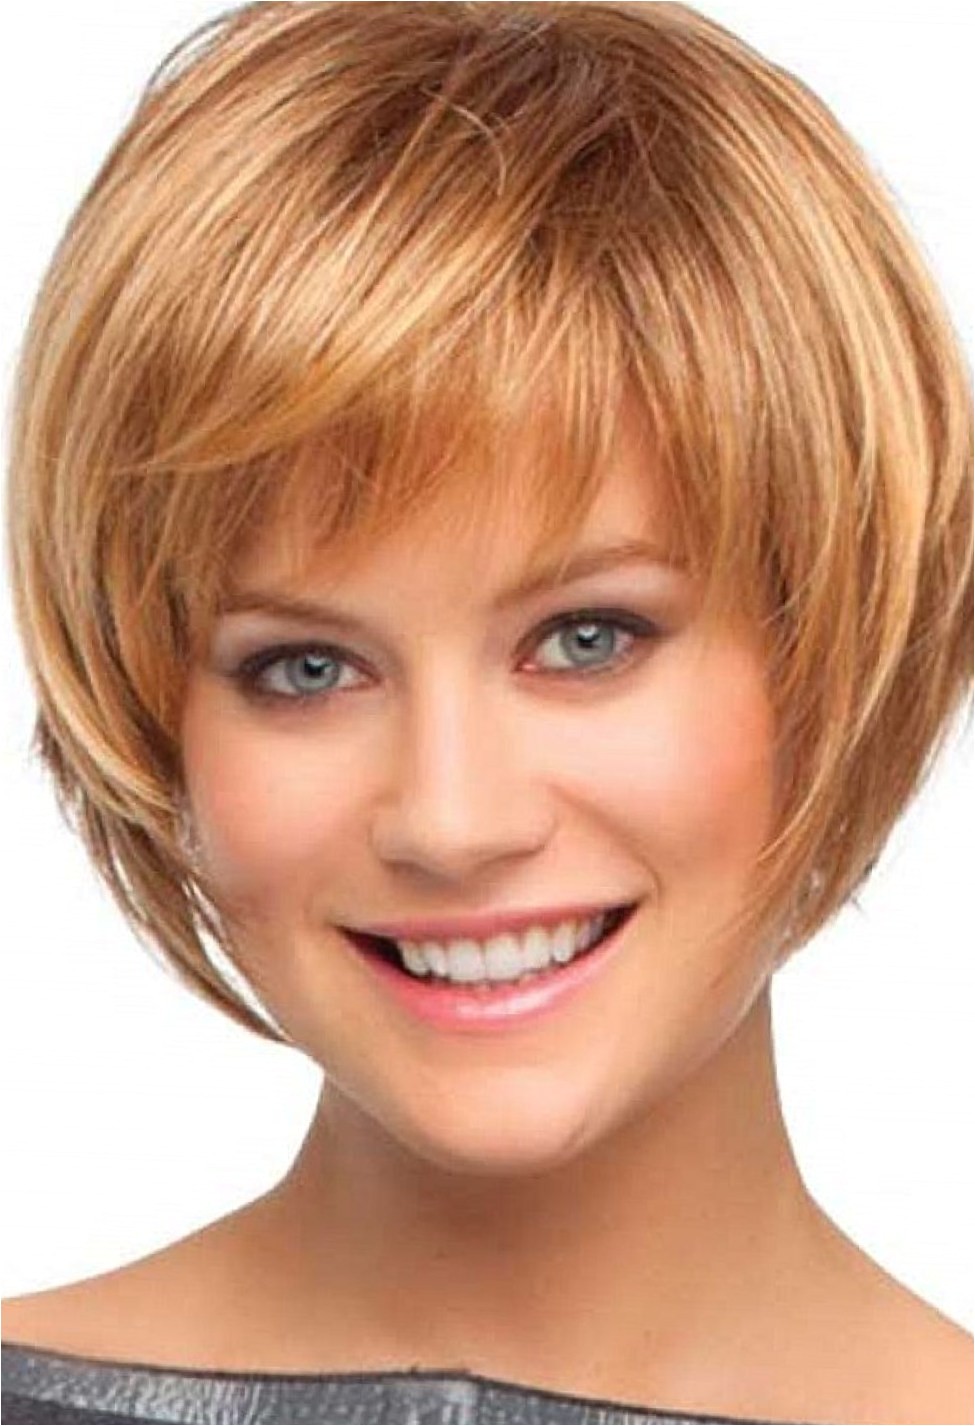 Short Bob Haircuts with Bangs and Layers Short Bob Hairstyles with Bangs 4 Perfect Ideas for You